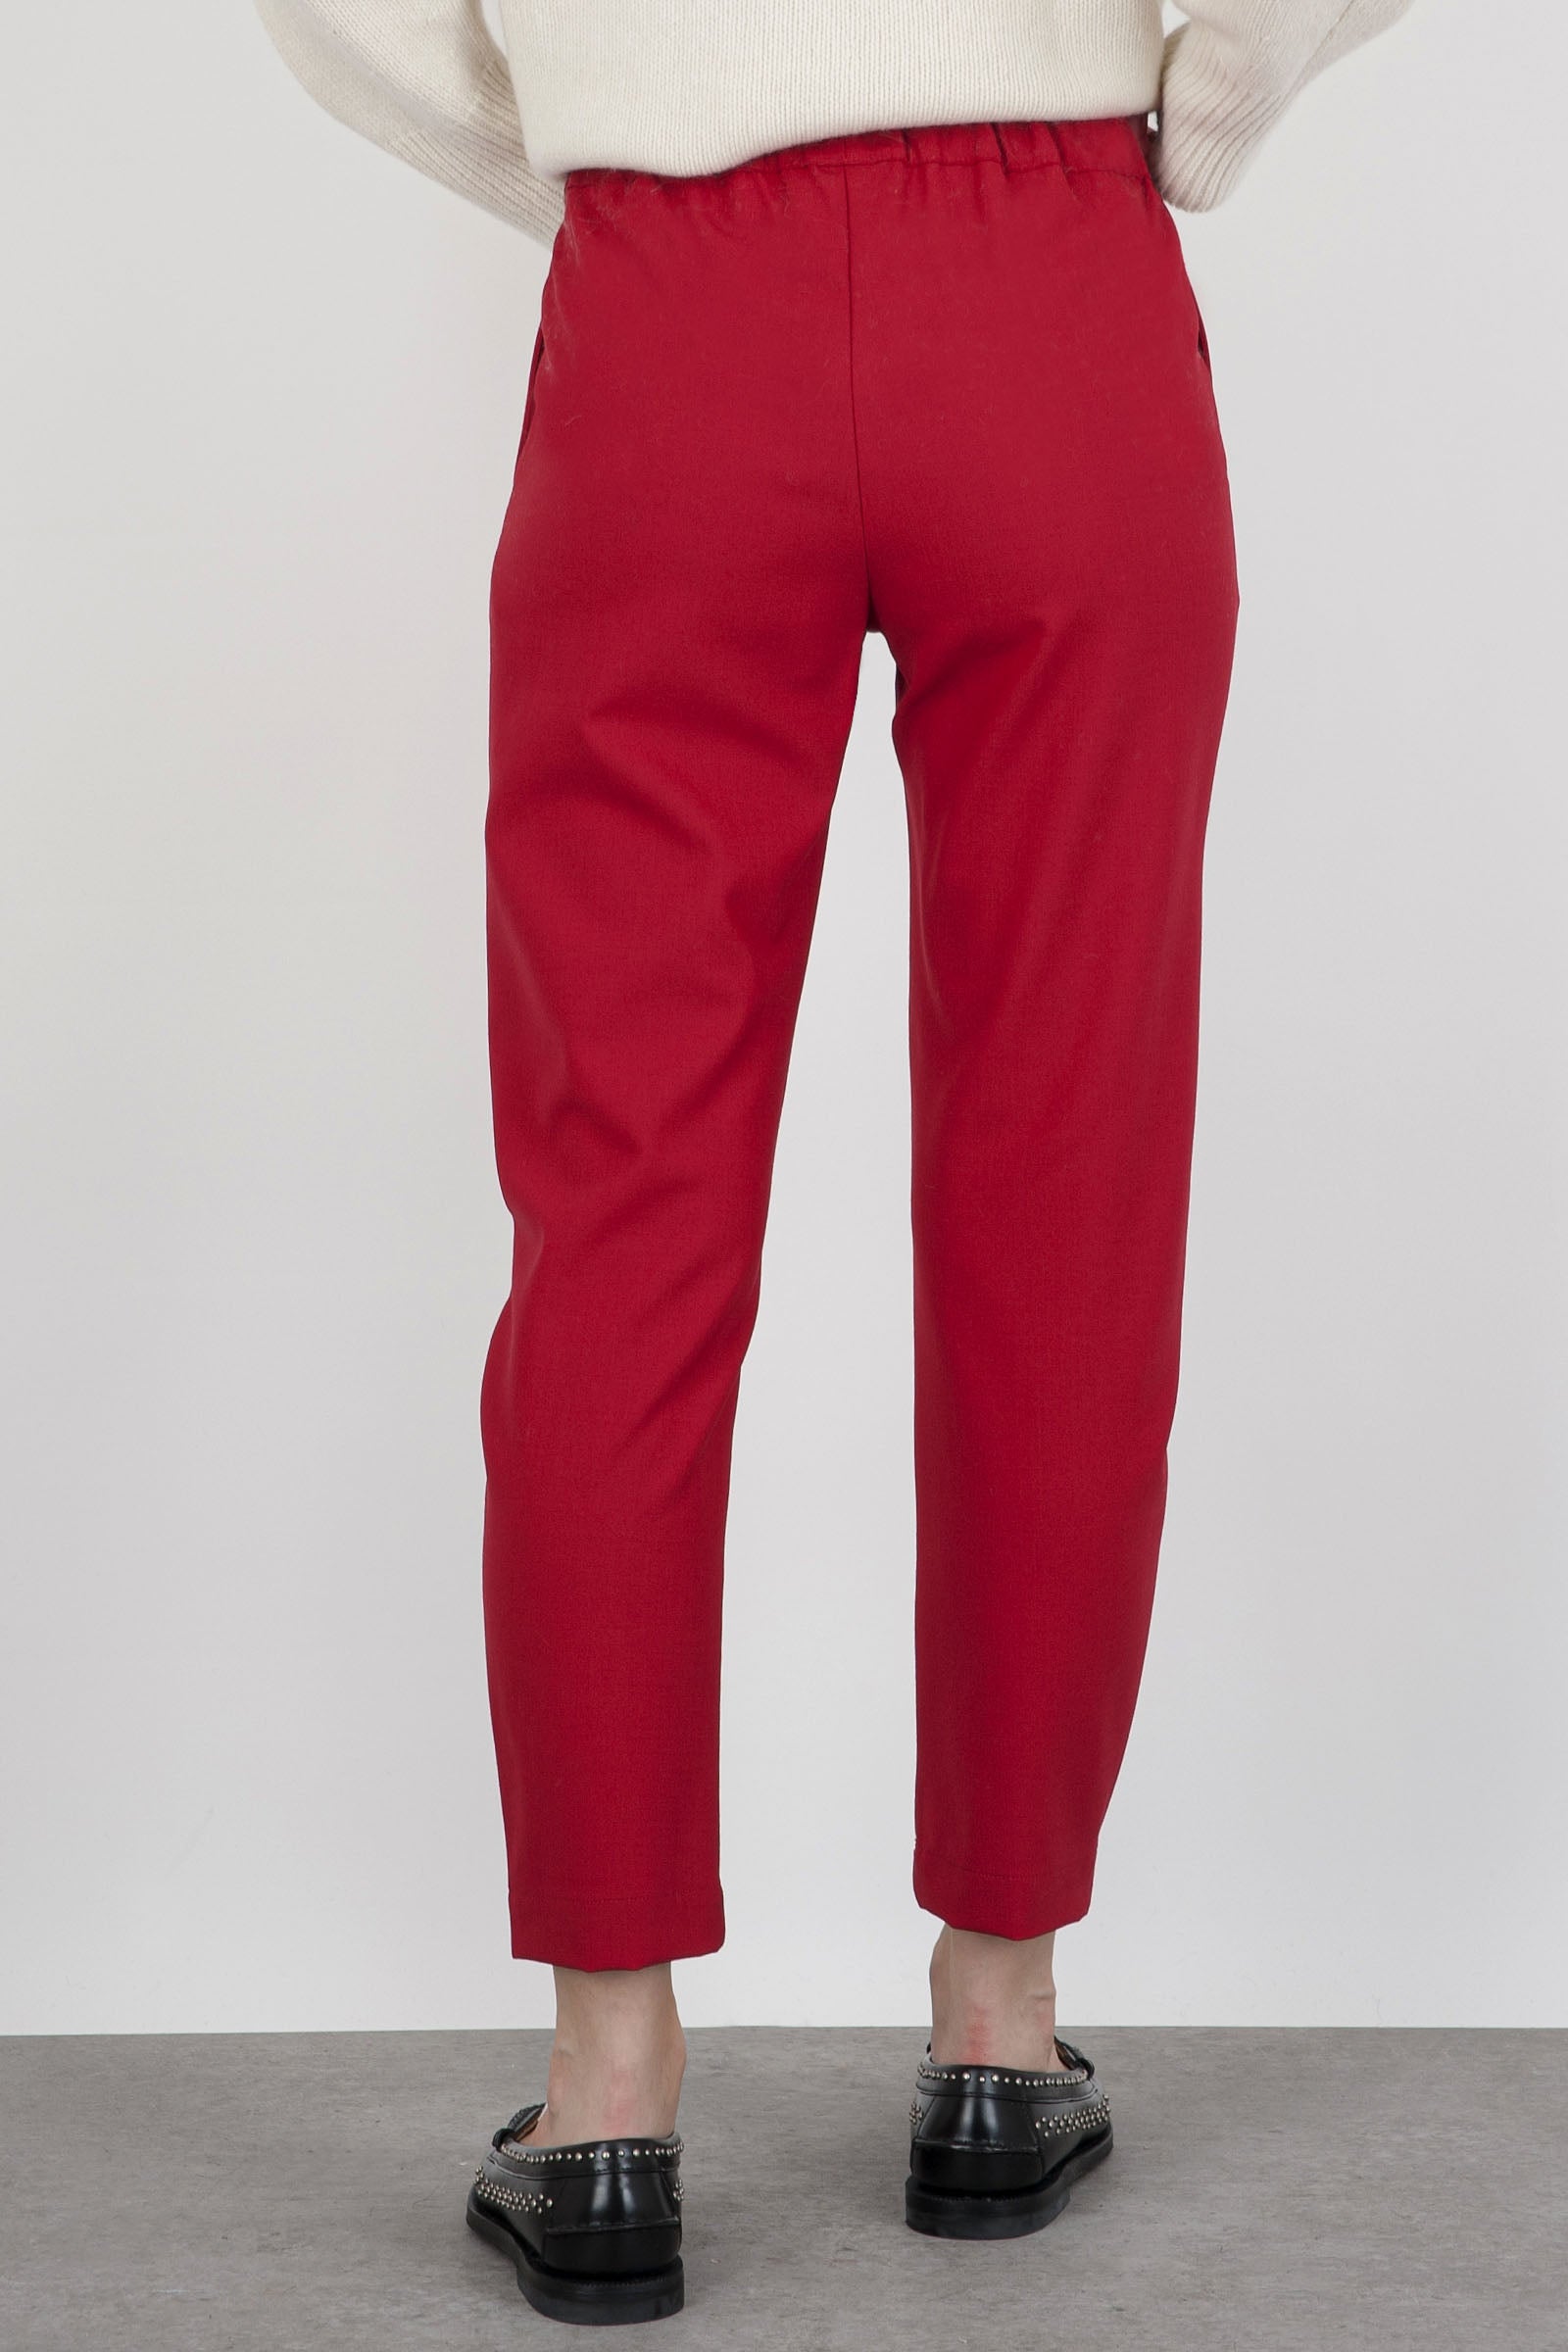 Semicouture Pantalone Buddy Rosso Donna Y3WI18D15 - 5